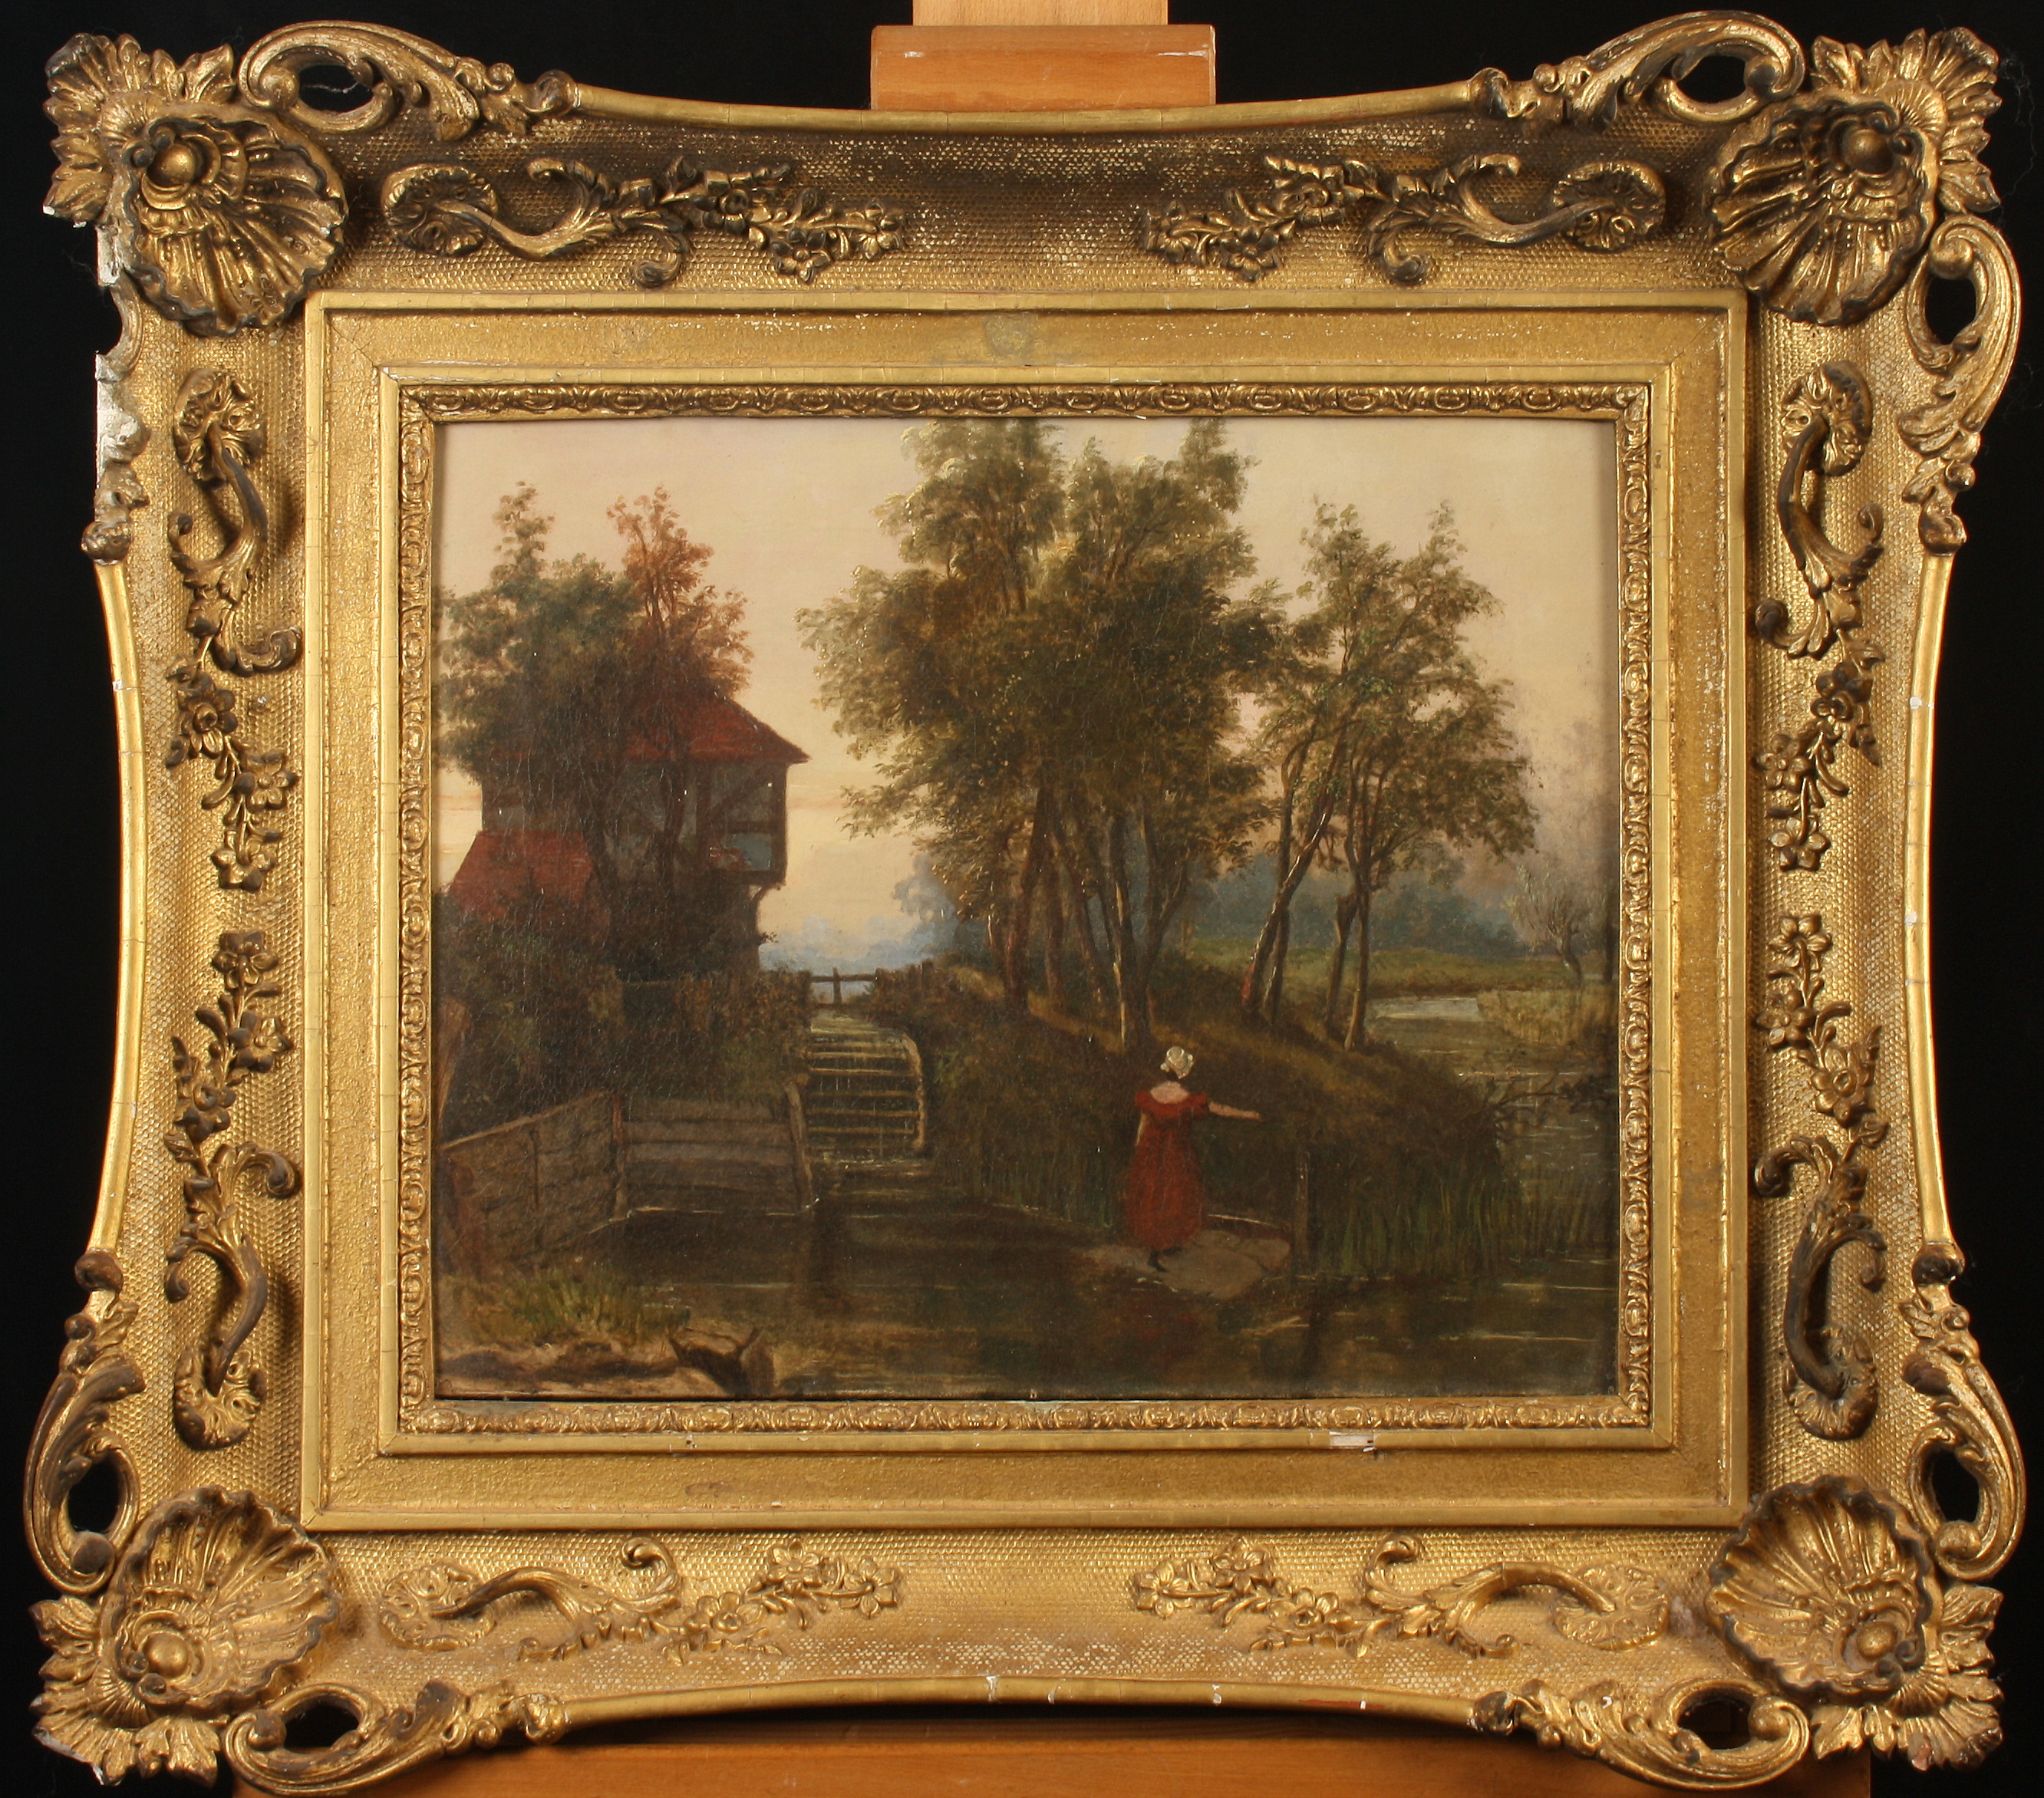 Early 19th century English School The Mill Oil on canvas 35 x 42cm - Image 2 of 2